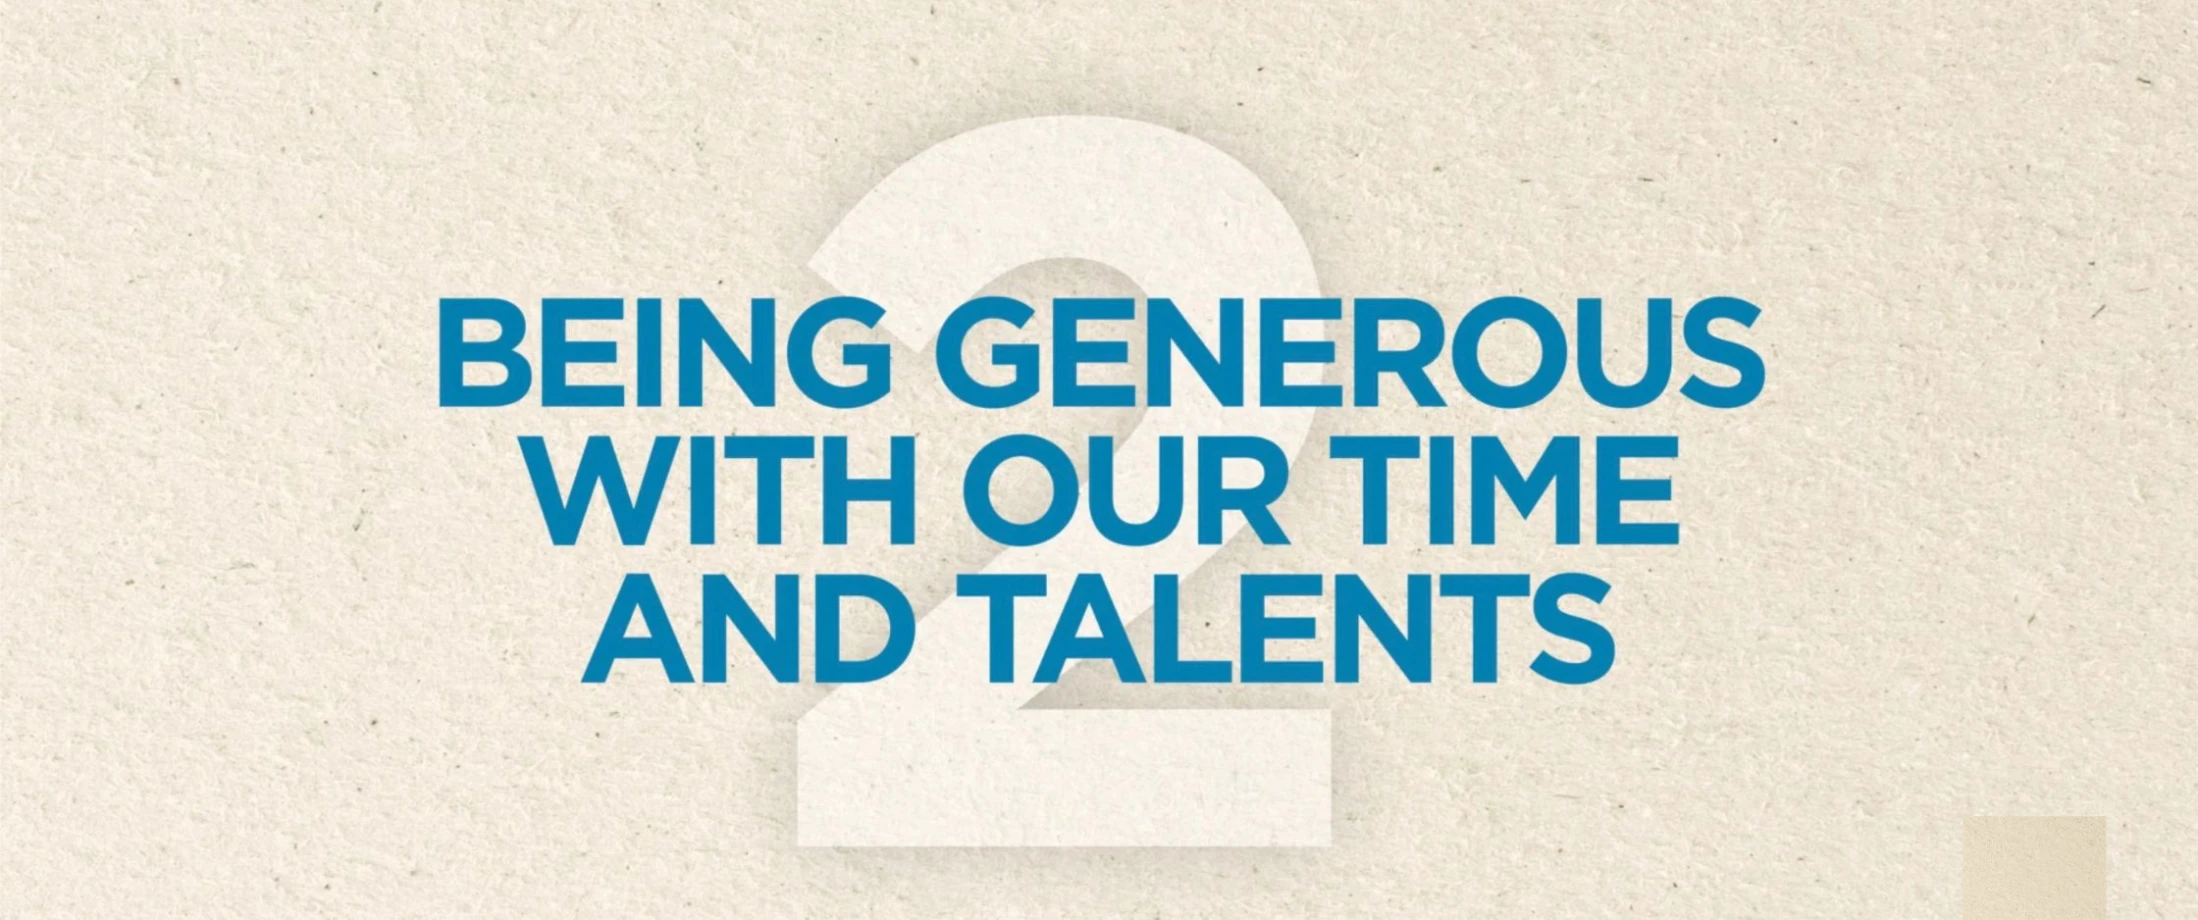 Being Generous With Our Time and Talents